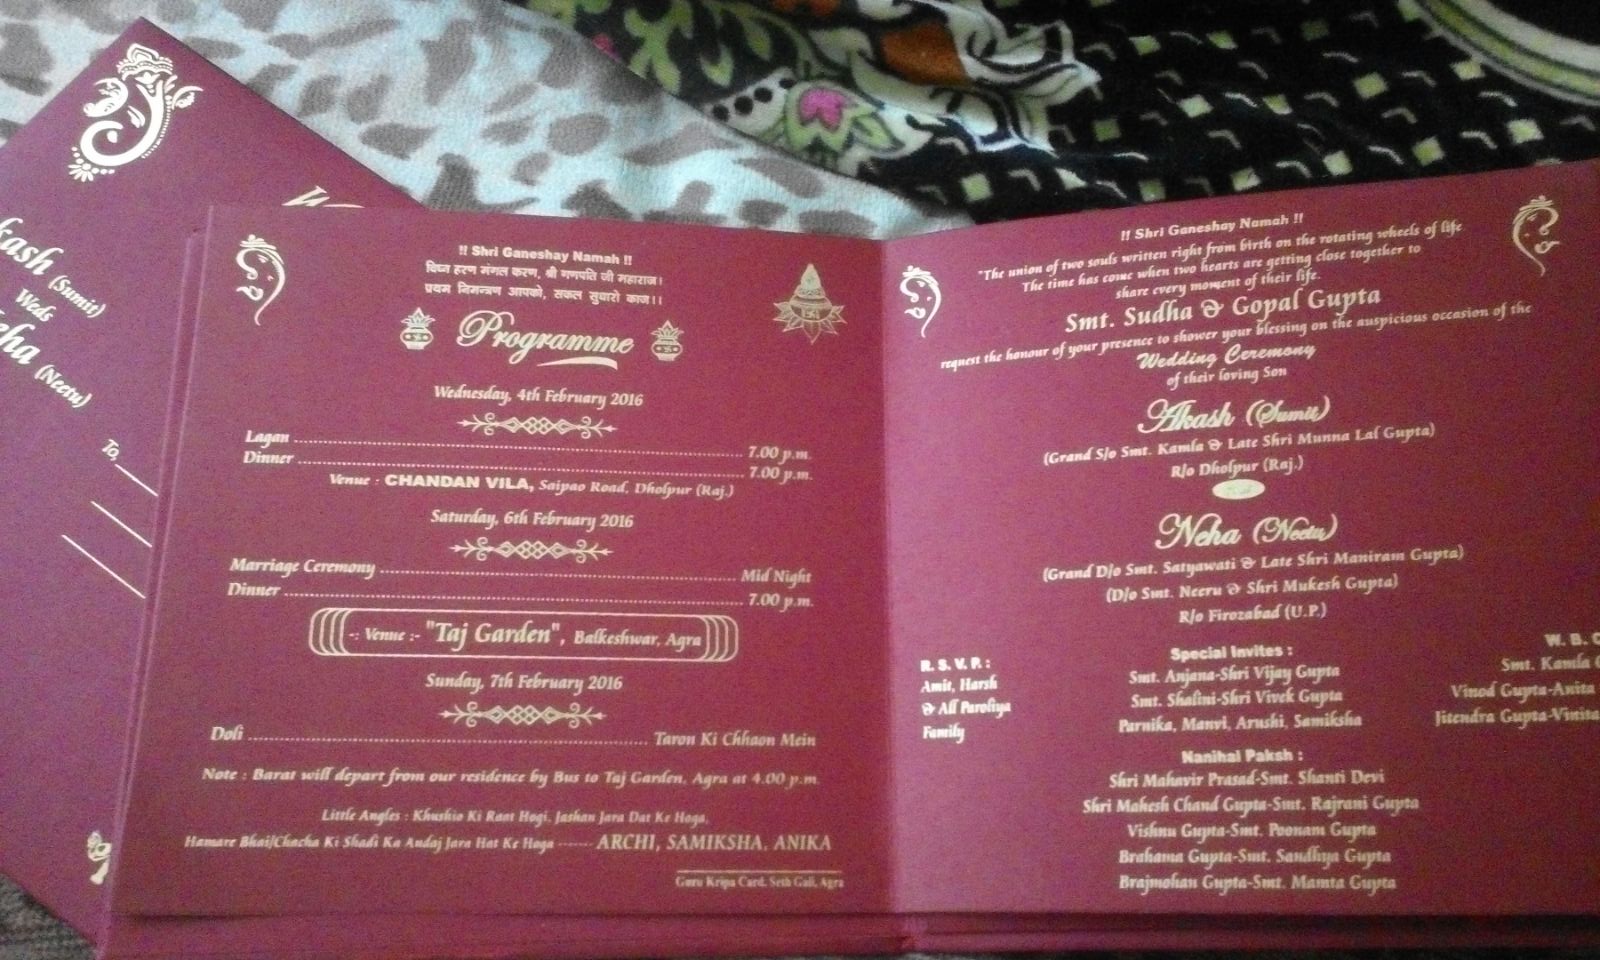 Wedding Invitation : Please consider this as personal invitation and